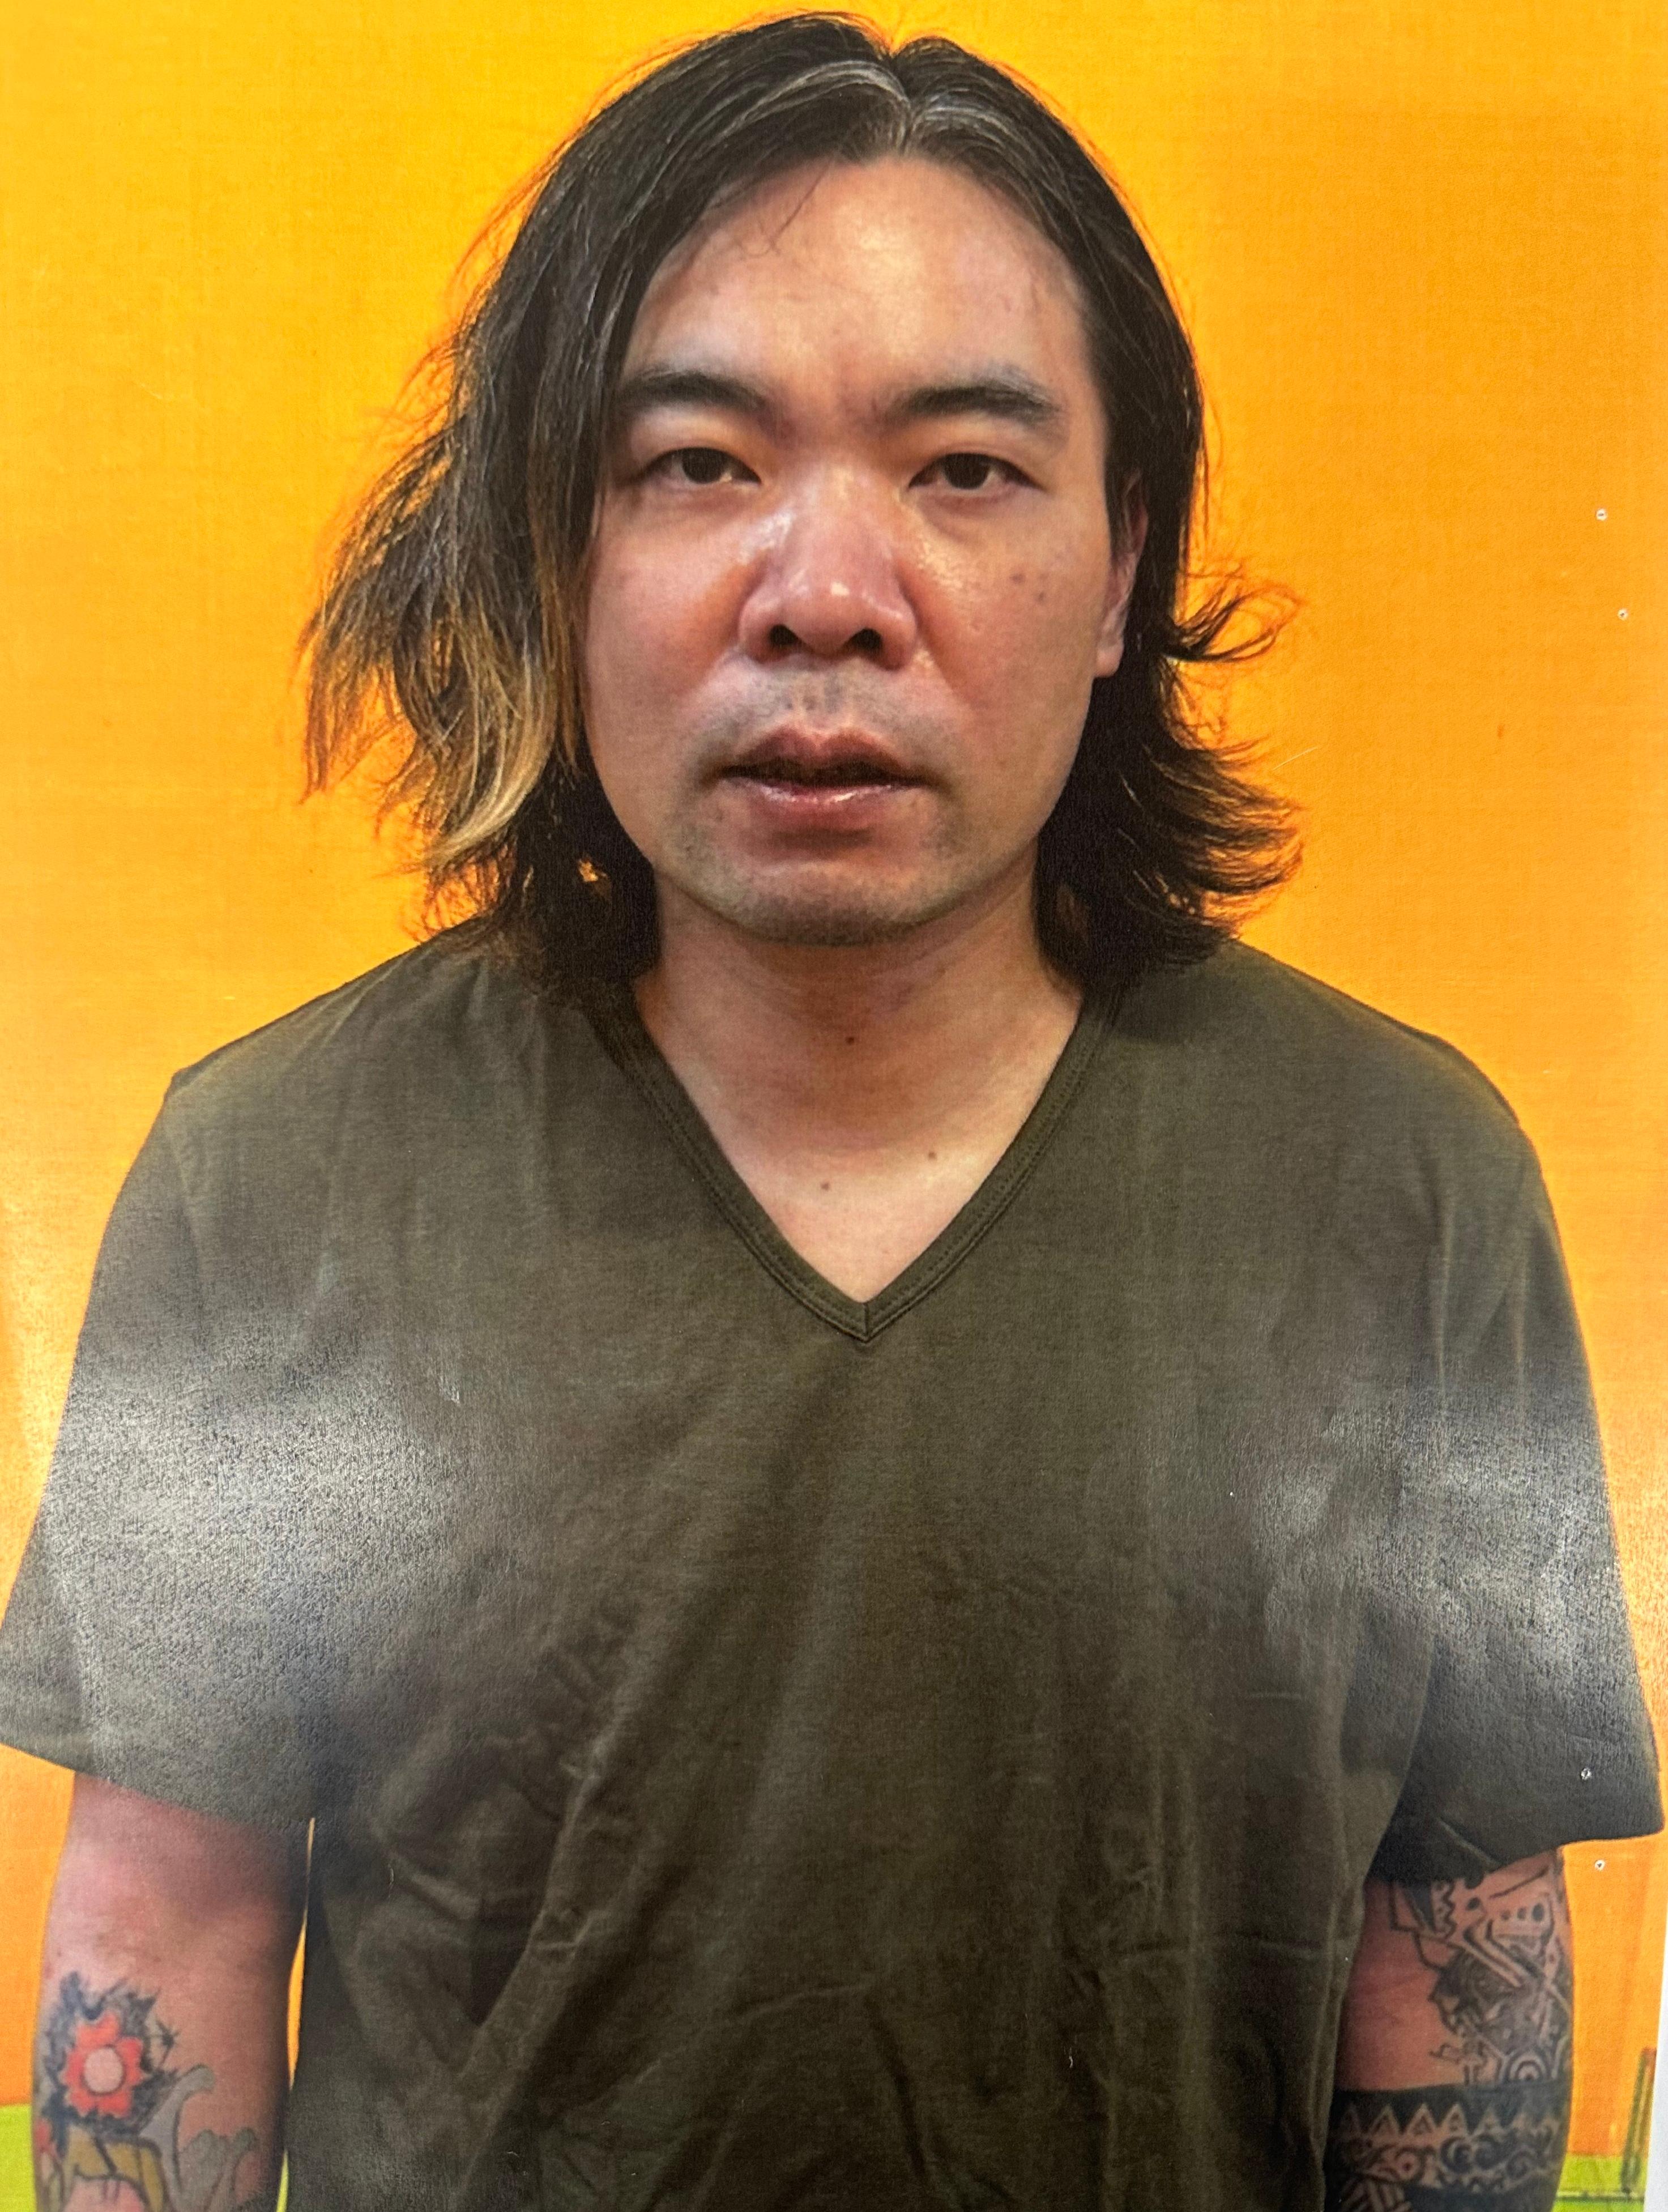 Ng Wai-hon, aged 43, is about 1.65 metres tall, 60 kilograms in weight and of medium build. He has a square face with yellow complexion and black and blonde curly hair in shoulder length. He was last seen wearing a green jacket, a black short-sleeved T-shirt, black trousers and black shoes.